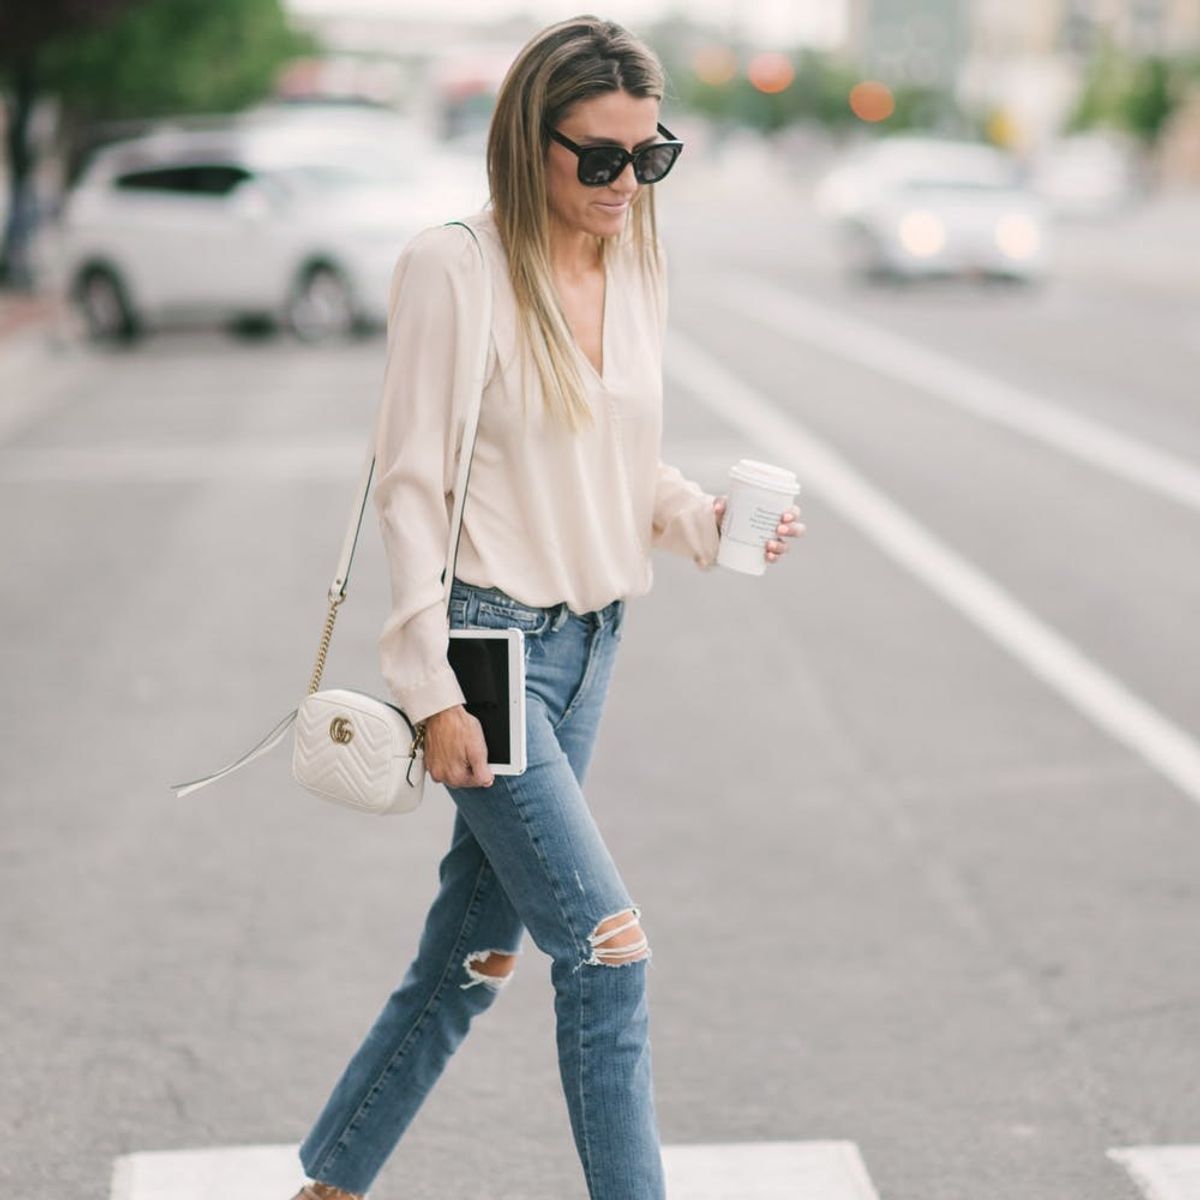 5 Fashion Must-Haves That Will Make You Street-Style Ready in No Time